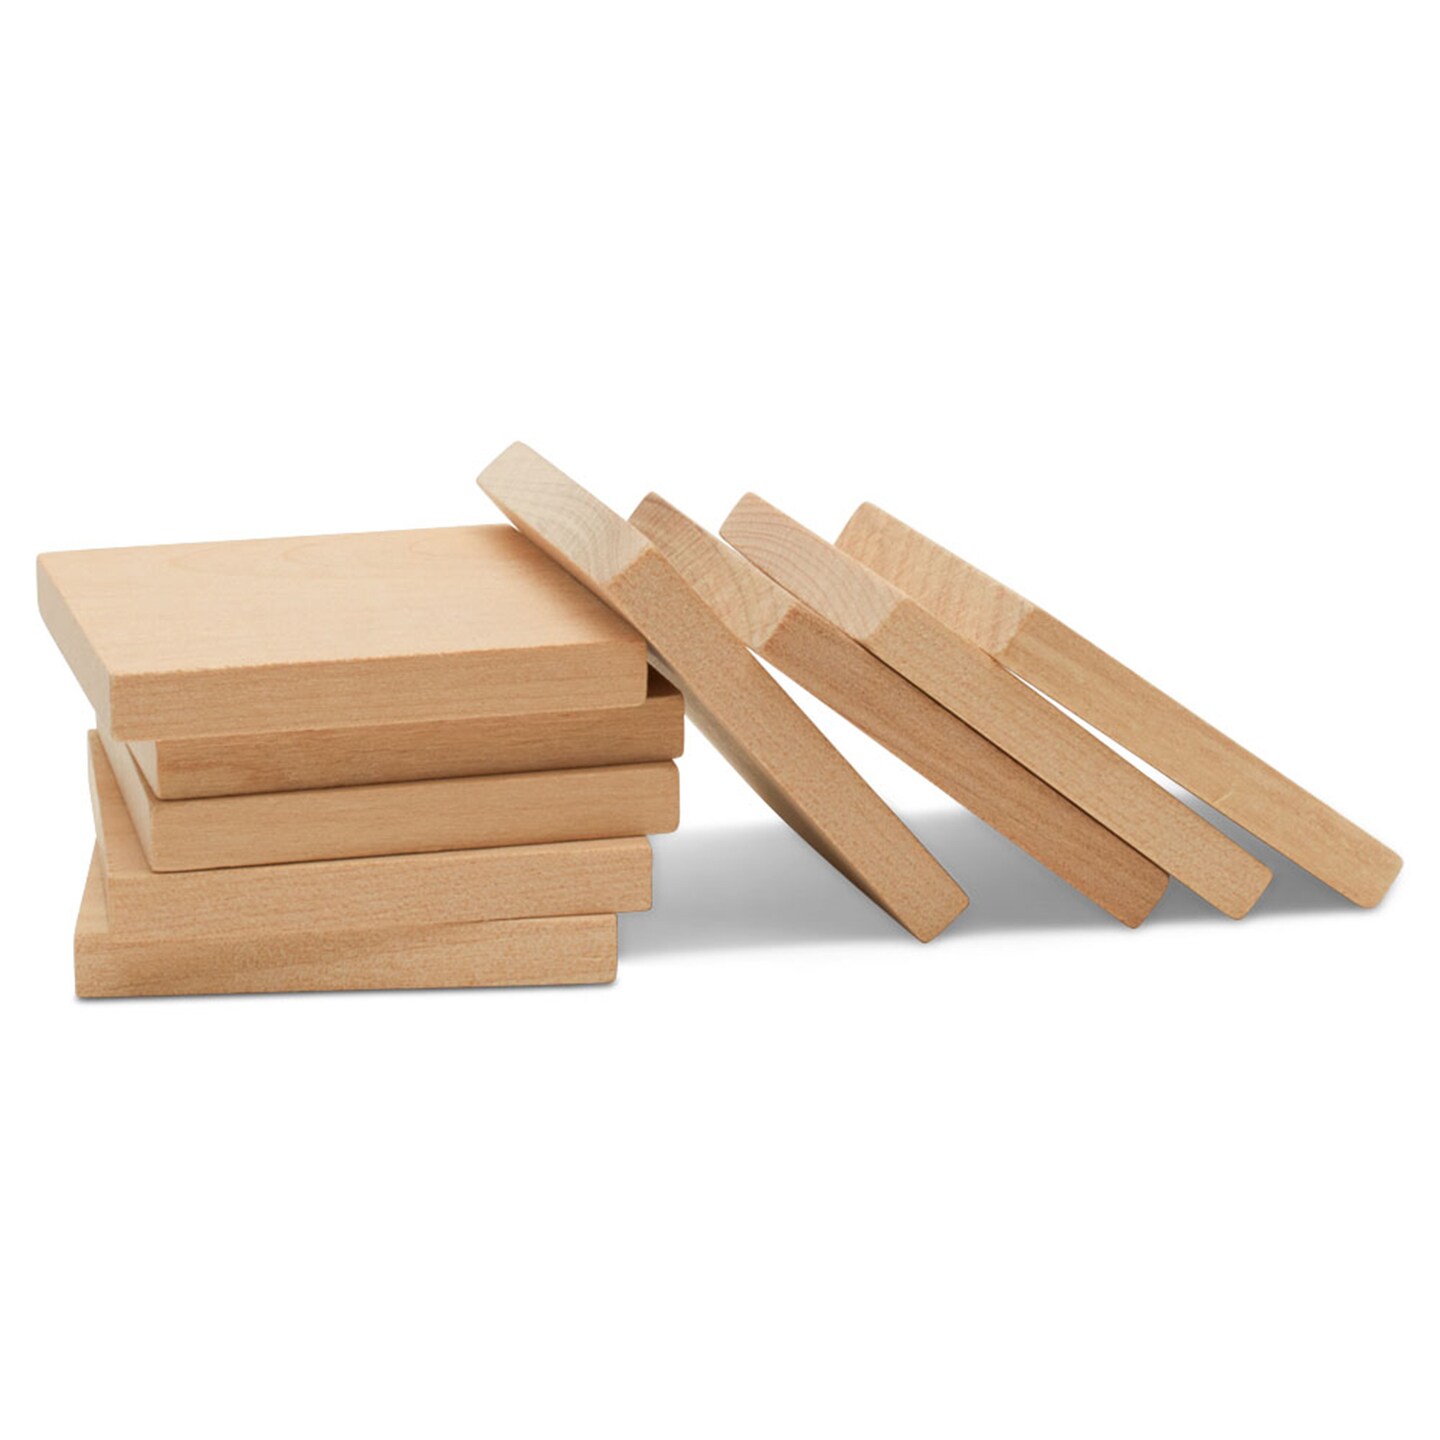 Wood Tiles, Multiple Sizes Available, Blank Wood Squares for Crafts, Woodpeckers